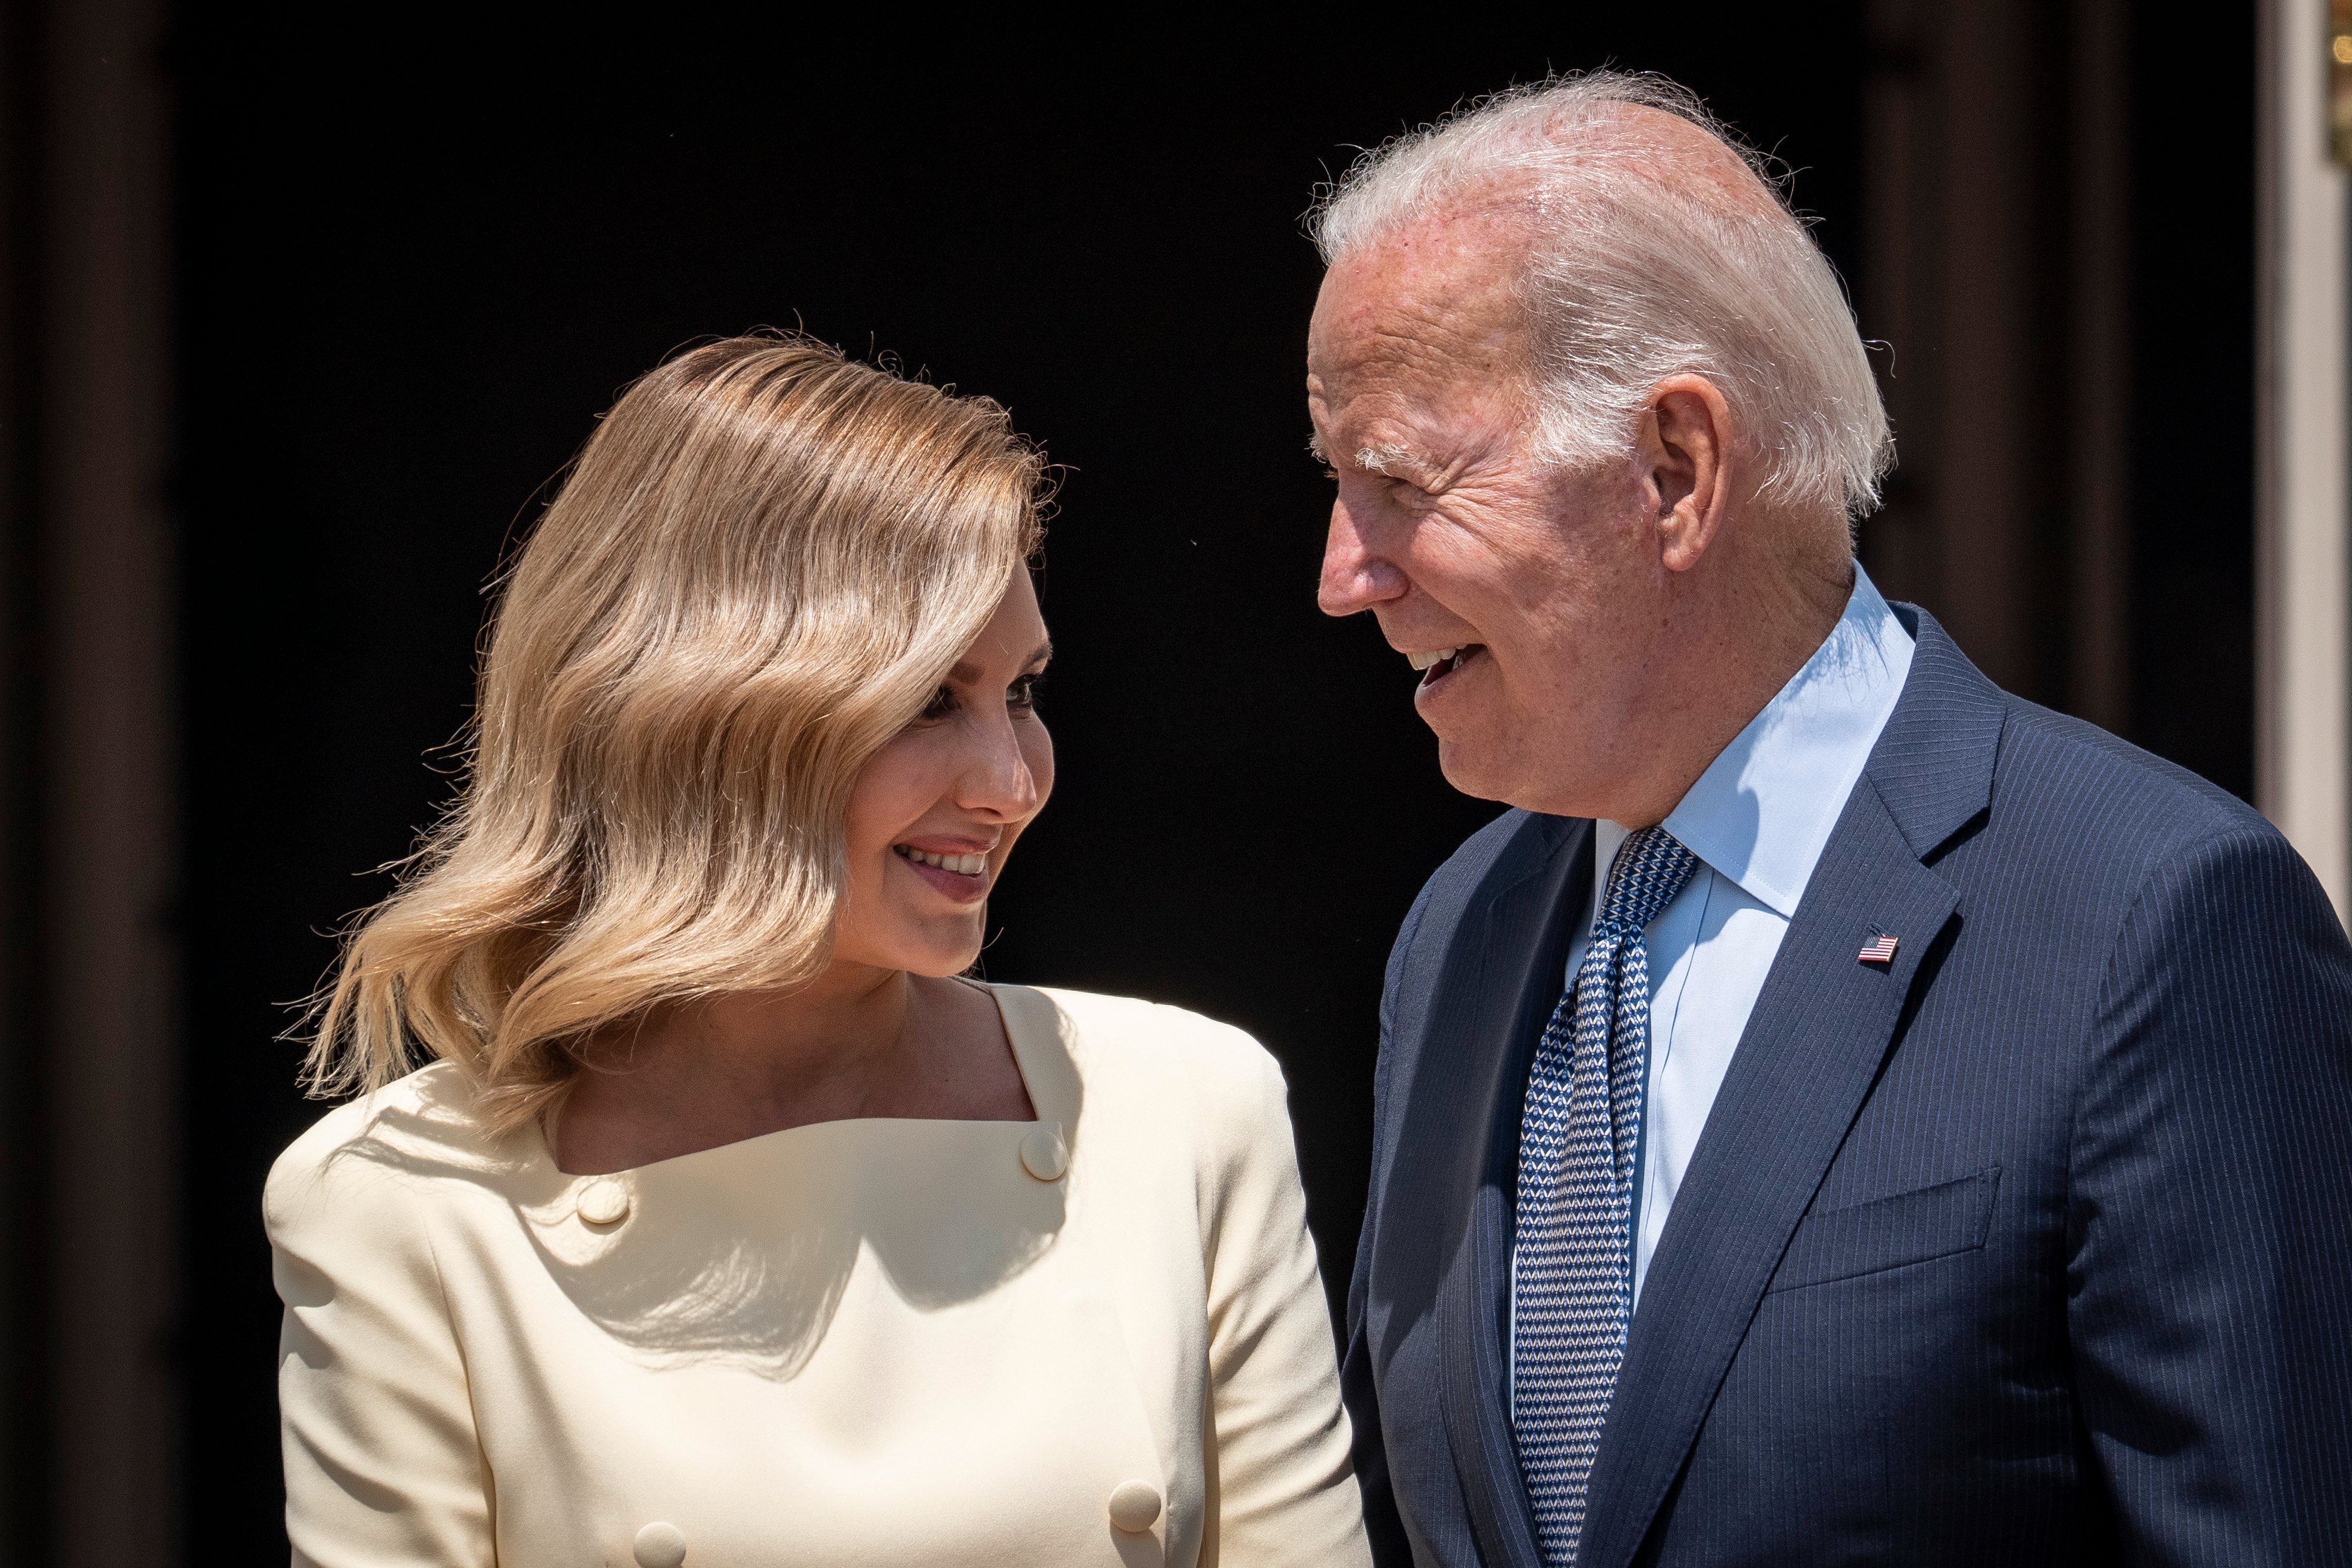 Jill Biden Welcomes The First Lady Of Ukraine To The White House